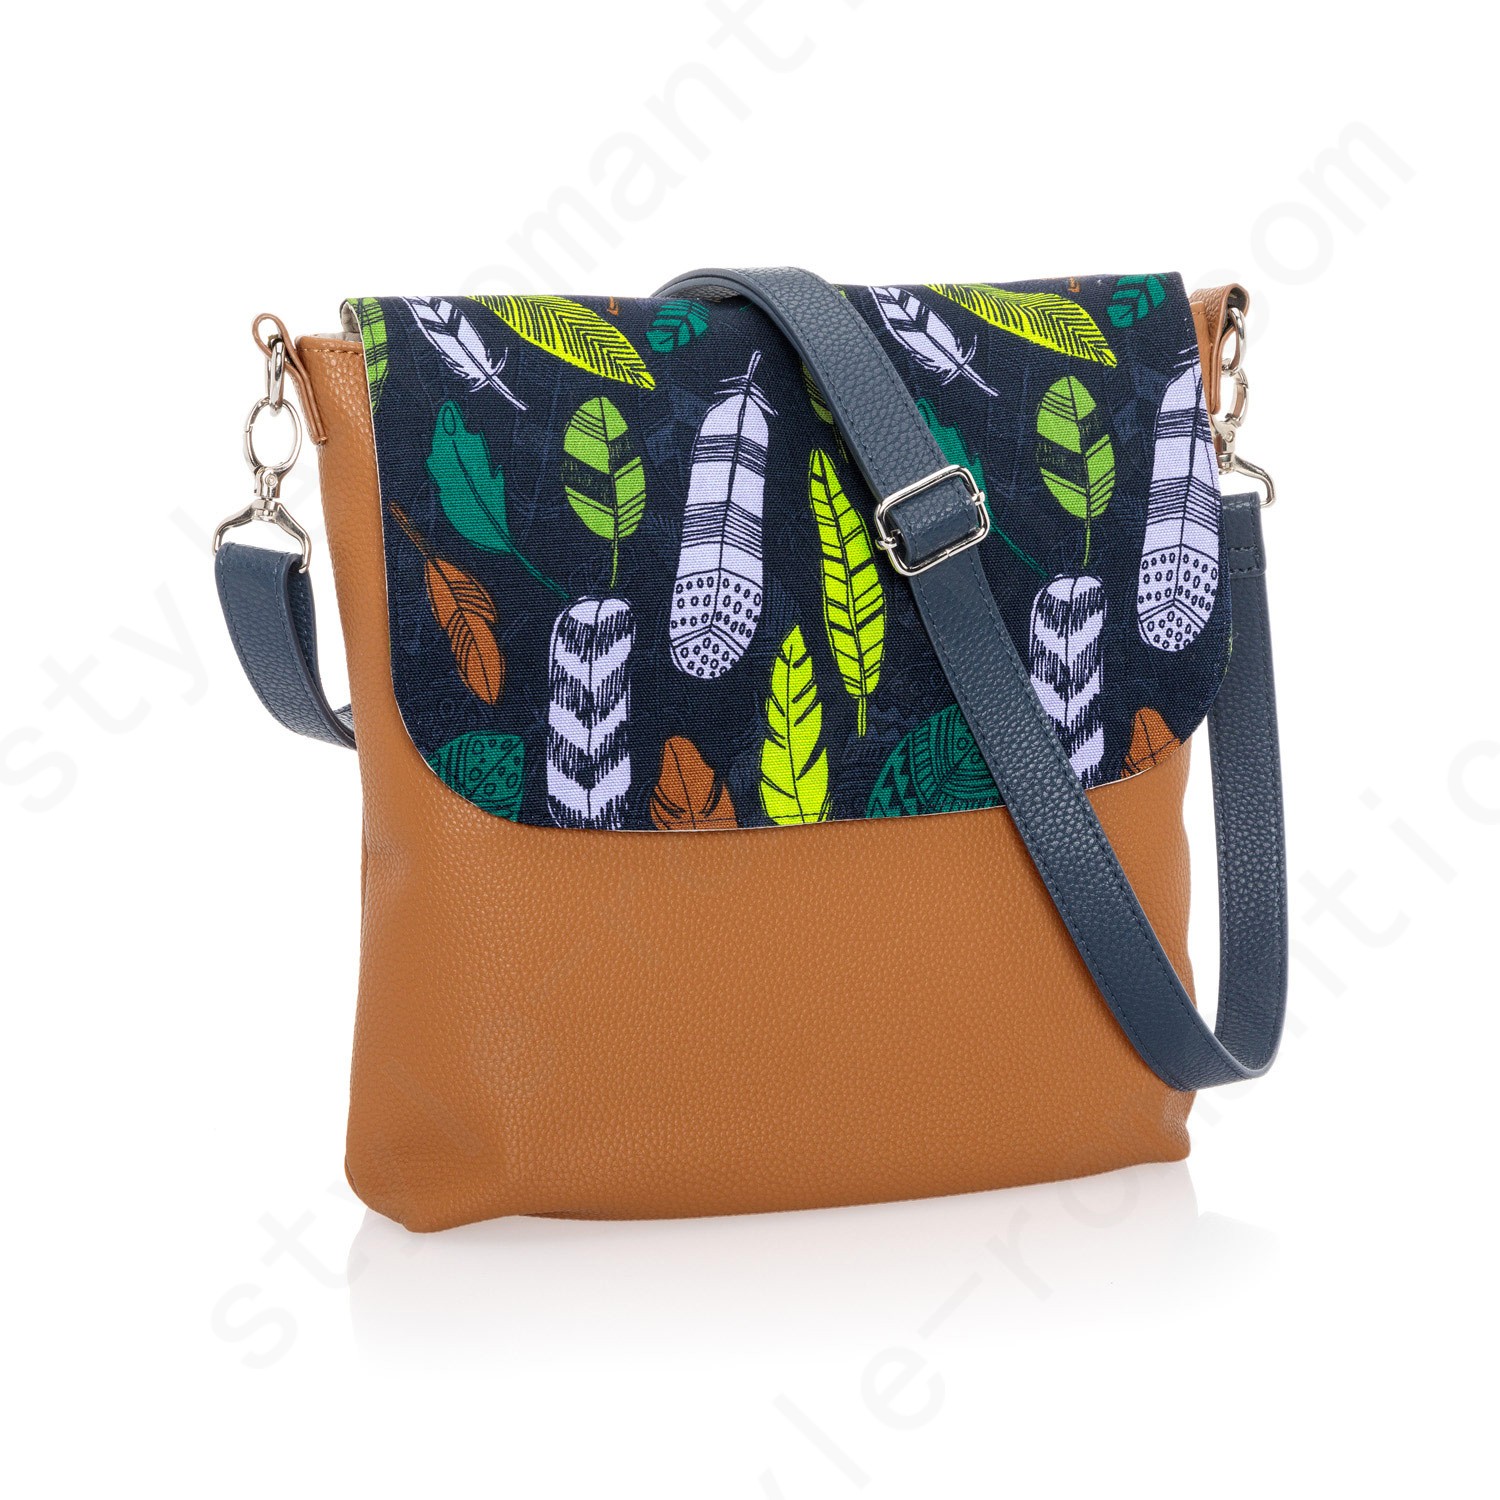 Thirty-One Gifts Studio Thirty-One Modern - Caramel Charm Pebble W/ Falling Feathers Bag Accessories - Thirty-One Gifts Studio Thirty-One Modern - Caramel Charm Pebble W/ Falling Feathers Bag Accessories